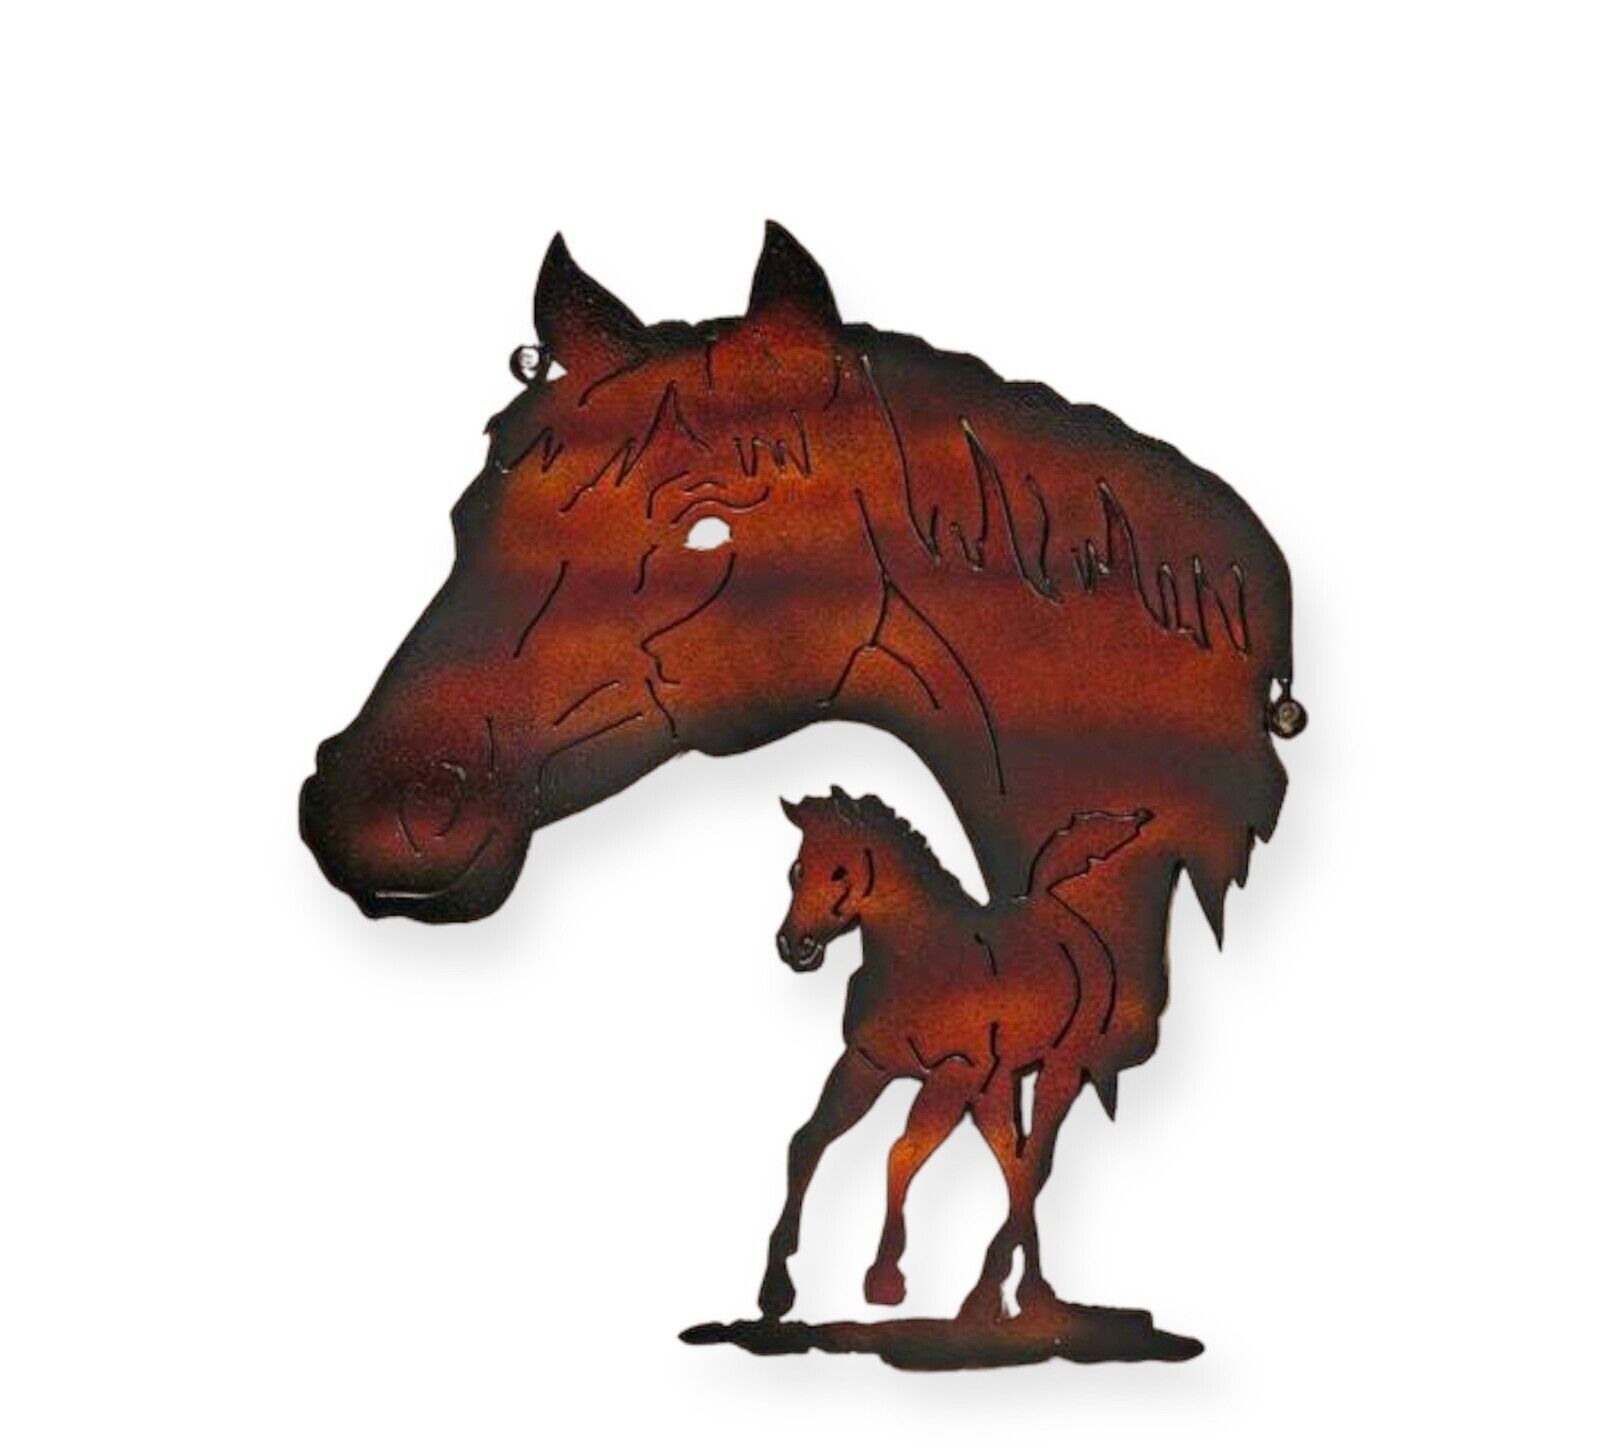 Horse Silhouette Wall Decor Metal Horse Head and Body 15" x 17" Copper Brown  - $34.64